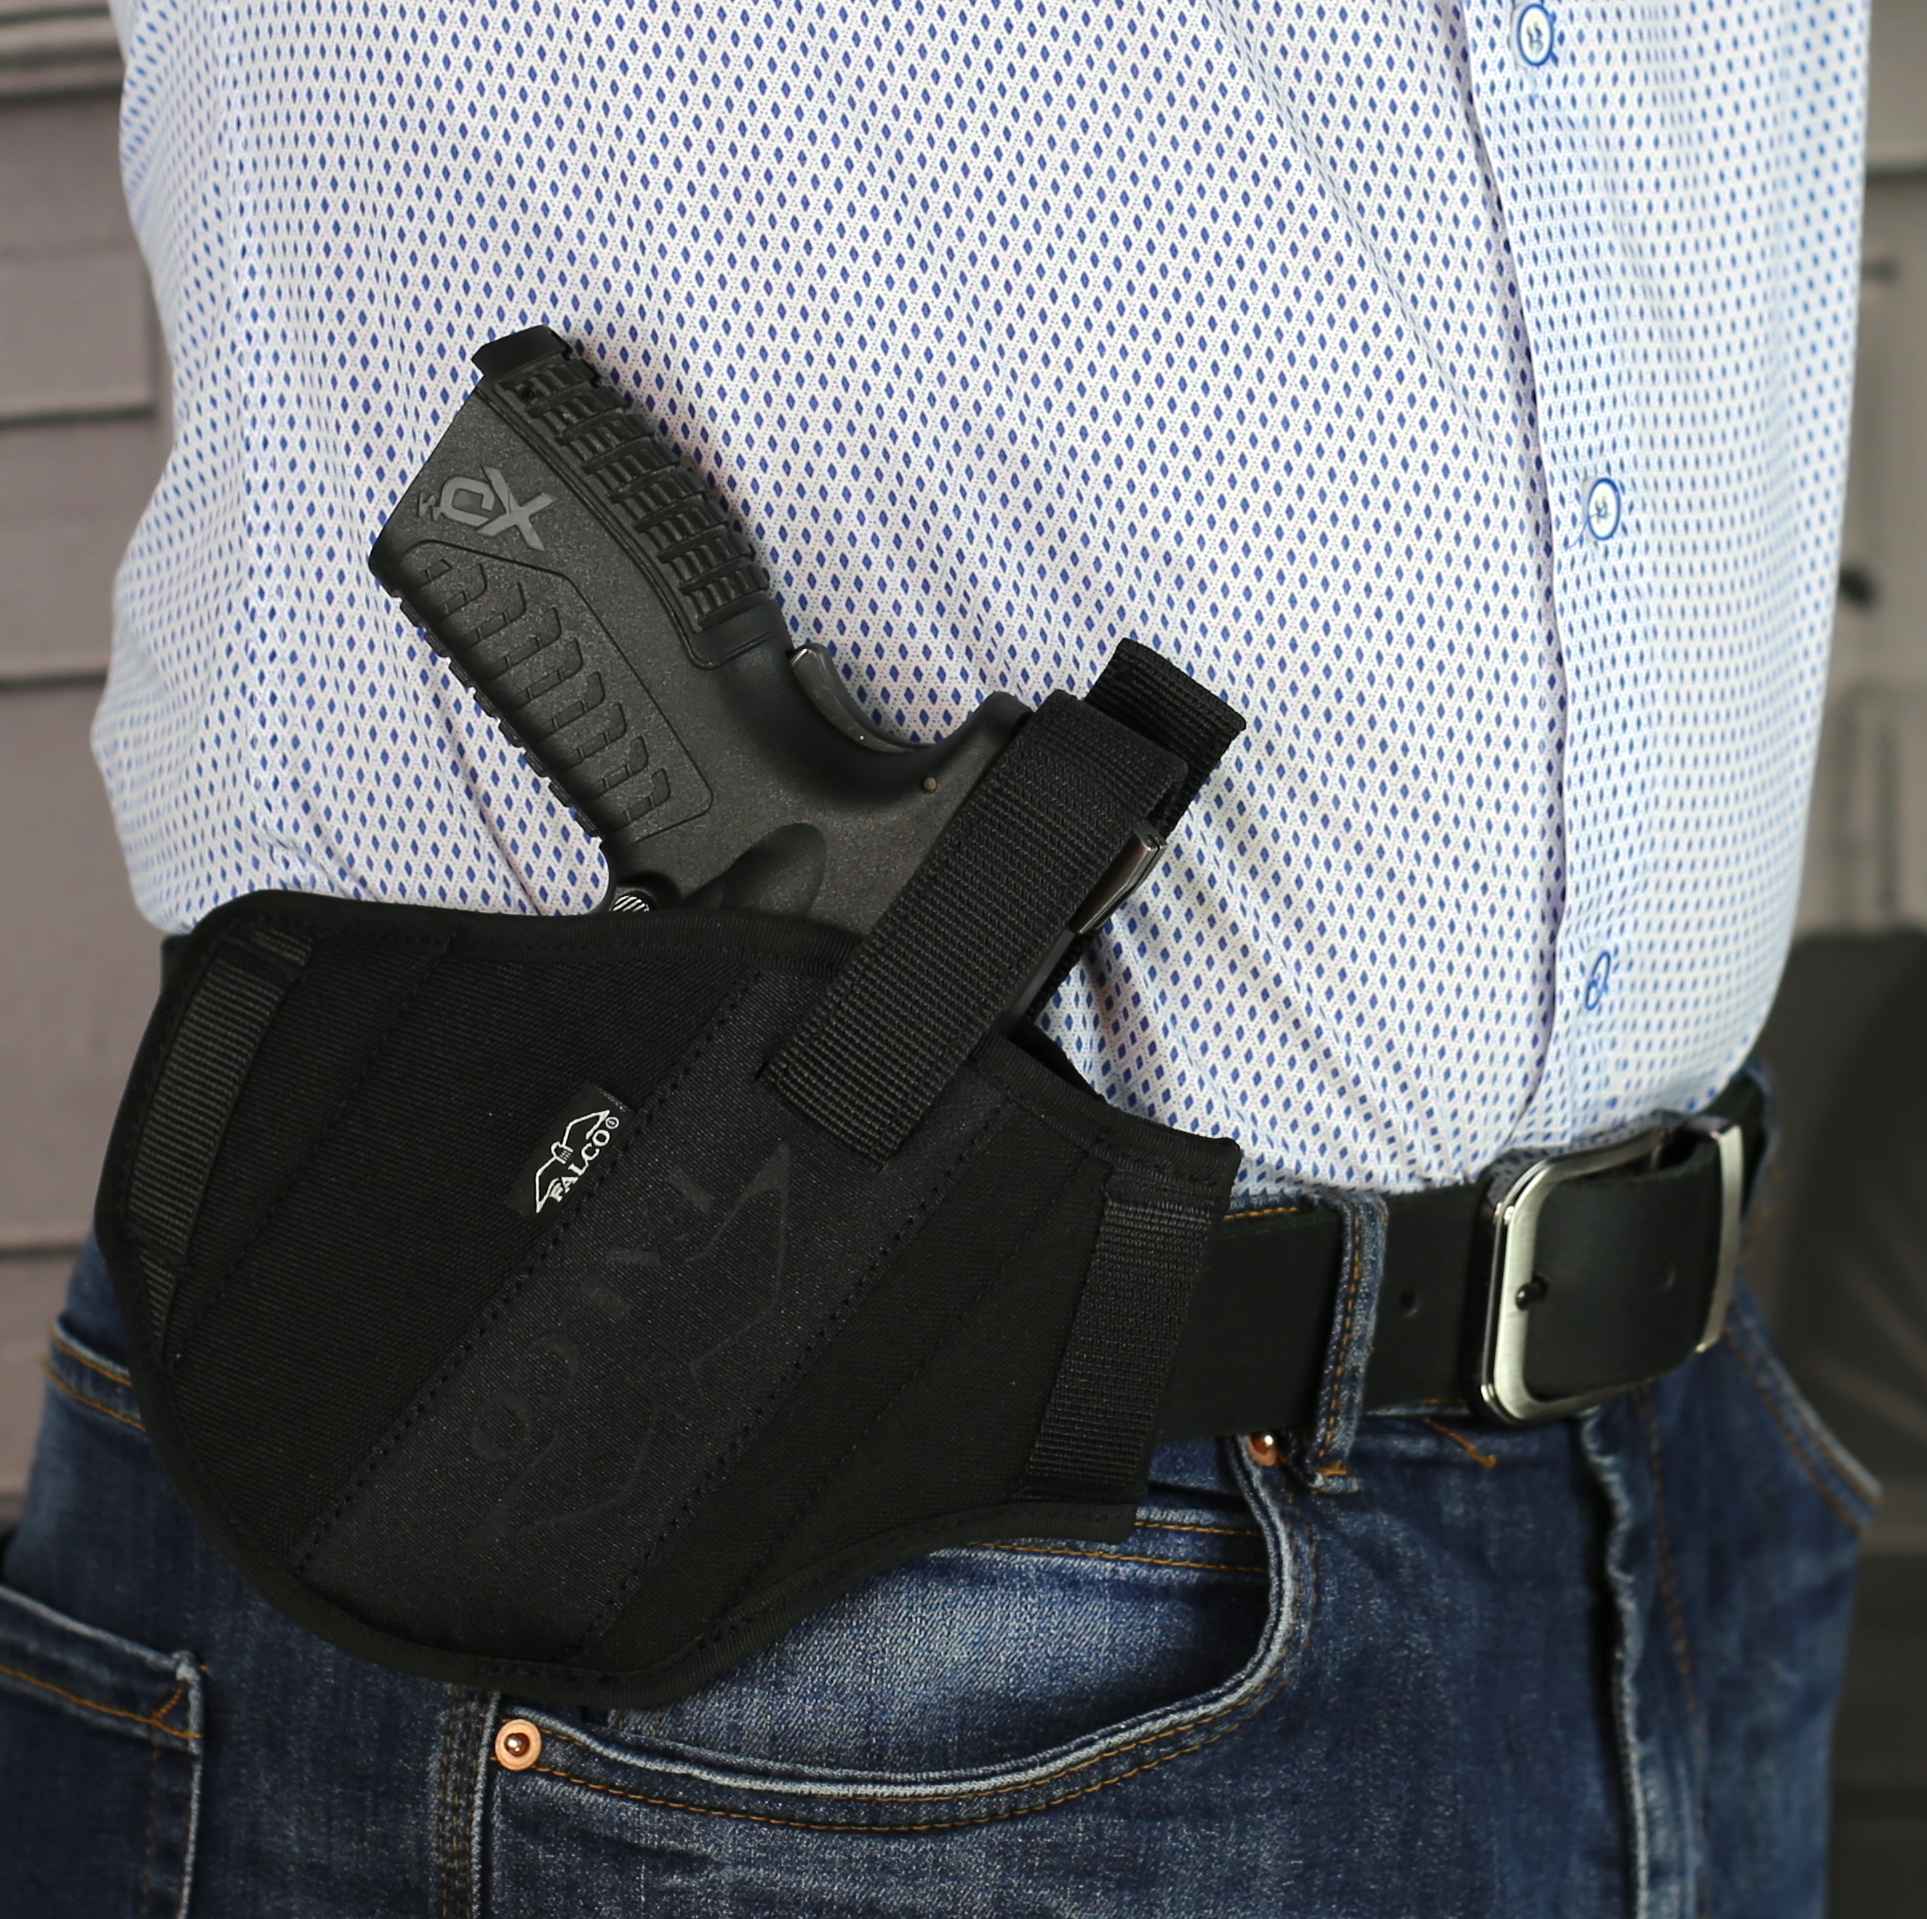 Details about  / Falco IWB Tuckable nylon holster for Grand Power CP380